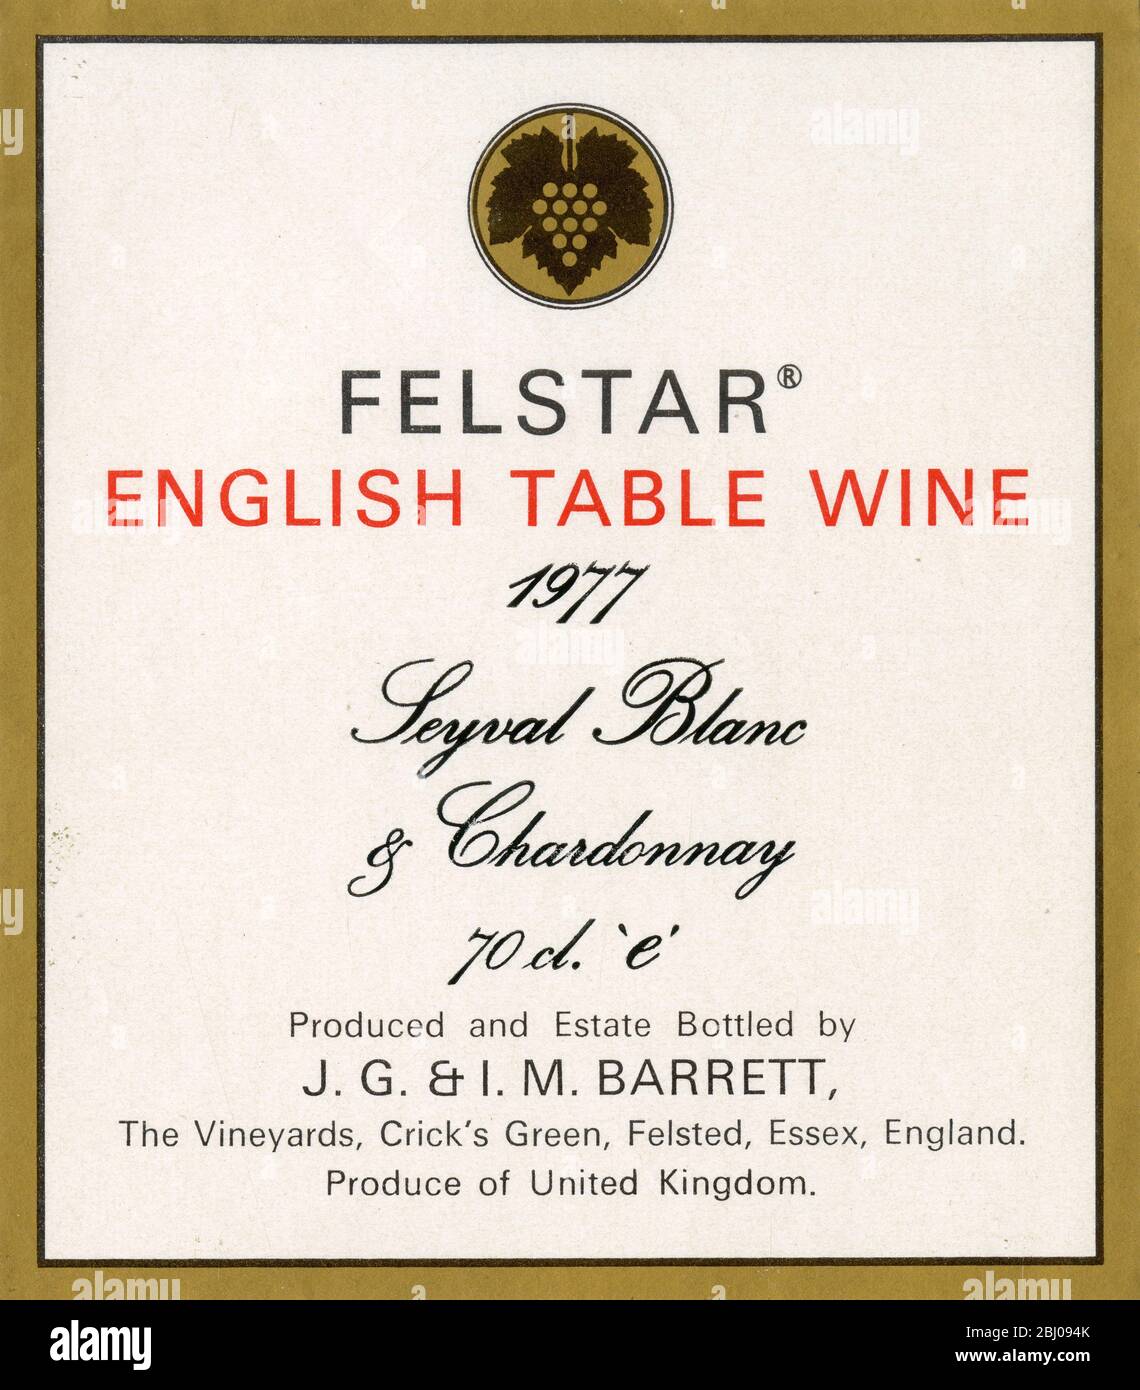 Wine Label - Felstar English Table Wine. A Seyval Blanc and Chardonnay vine variety produced by J.G. & I.M. Barrett in Felsted, Essex. - Stock Photo